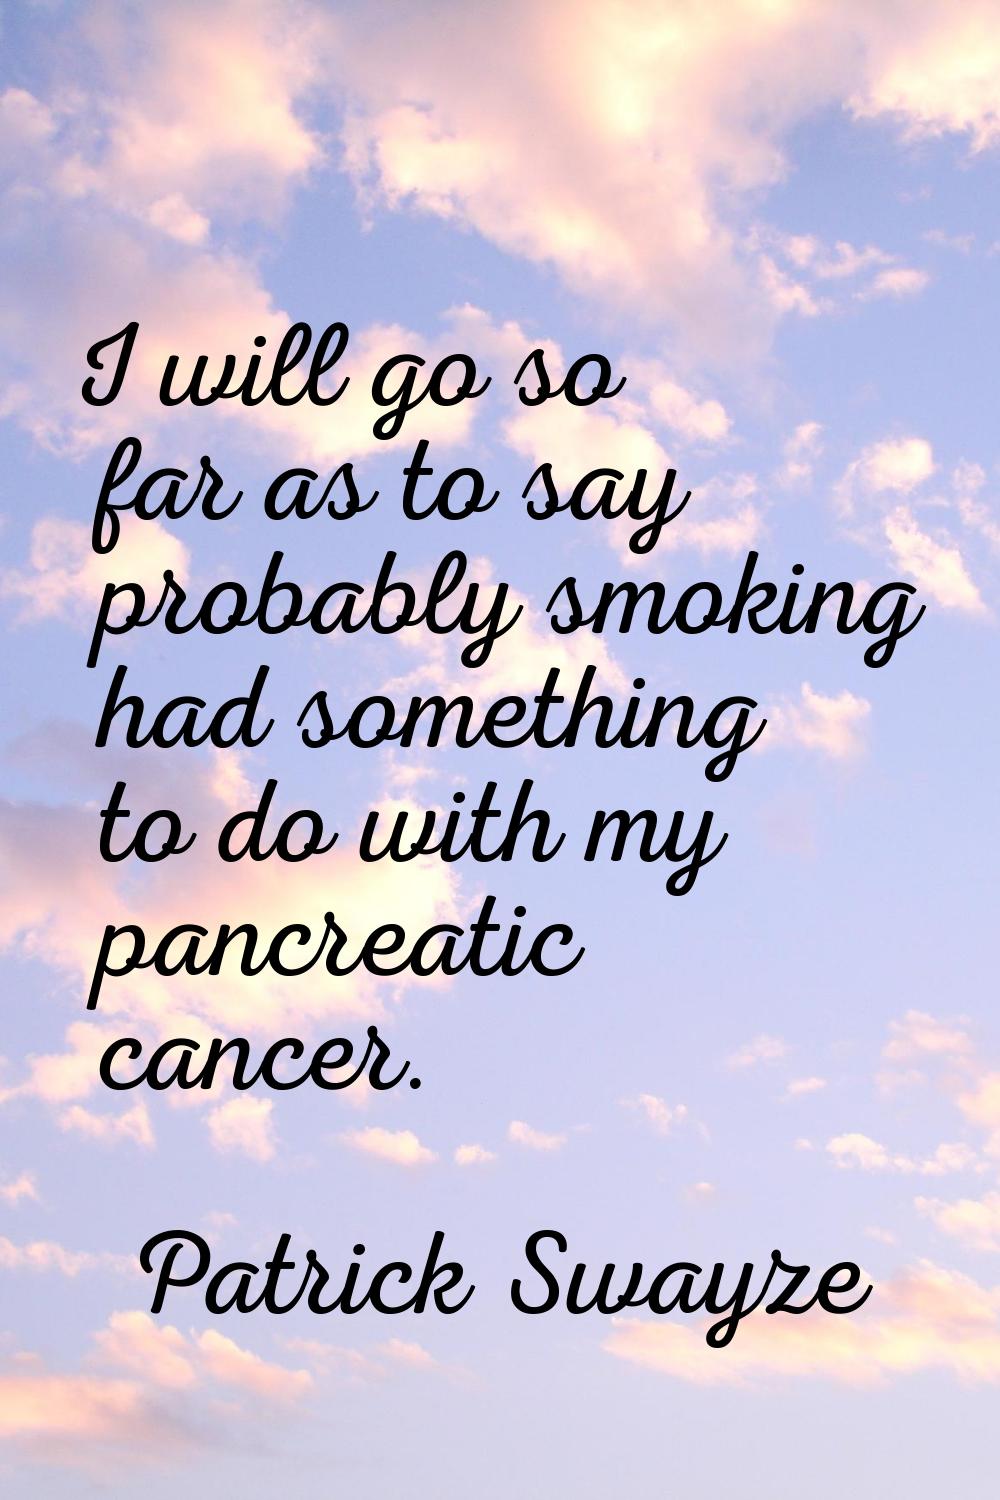 I will go so far as to say probably smoking had something to do with my pancreatic cancer.